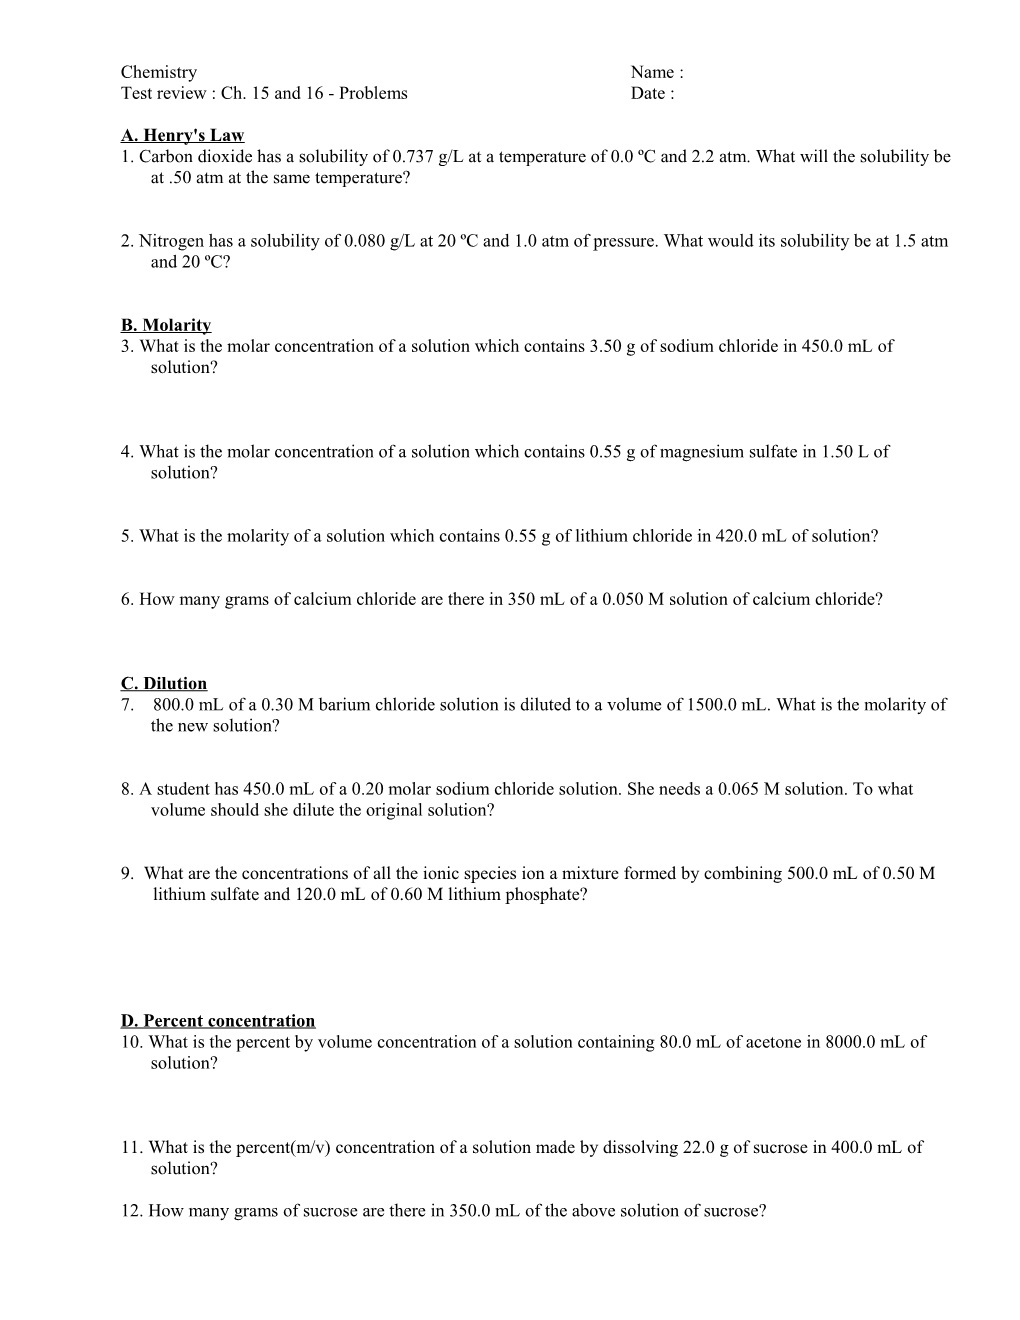 Test Review : Ch. 15 and 16 - Problems Date